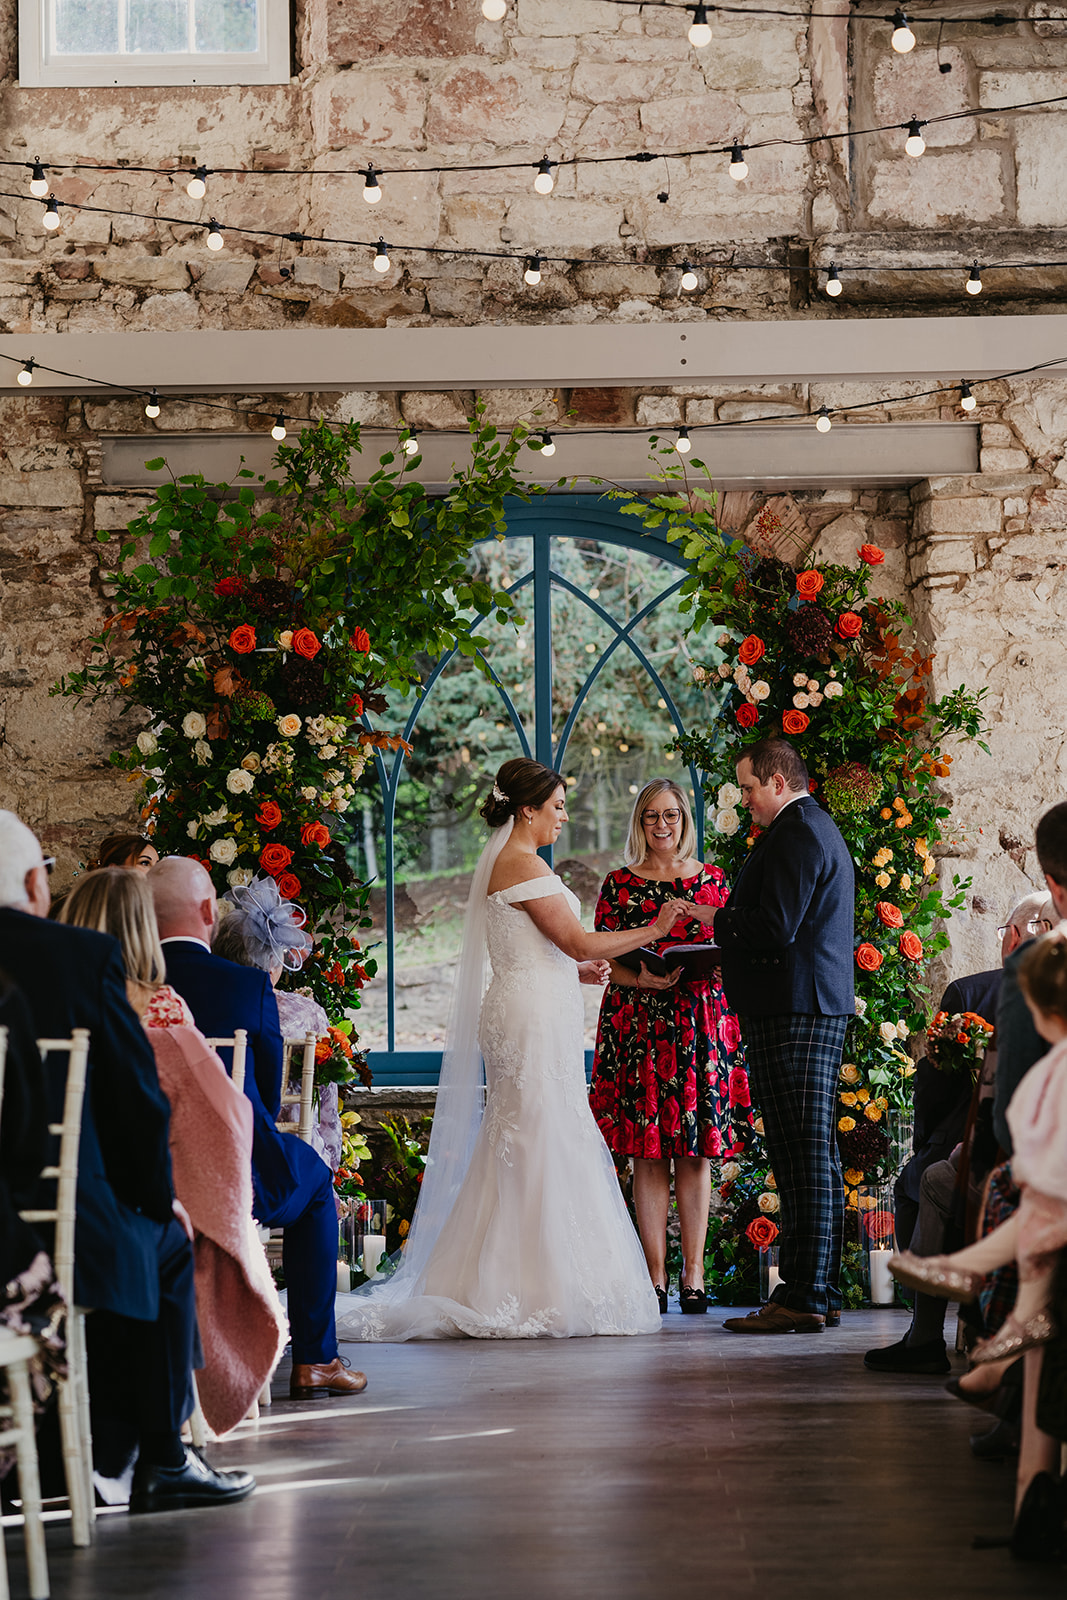 The stunning ceremony space at Broxmouth Courtyard flowers by Wild Flowers Edinburgh